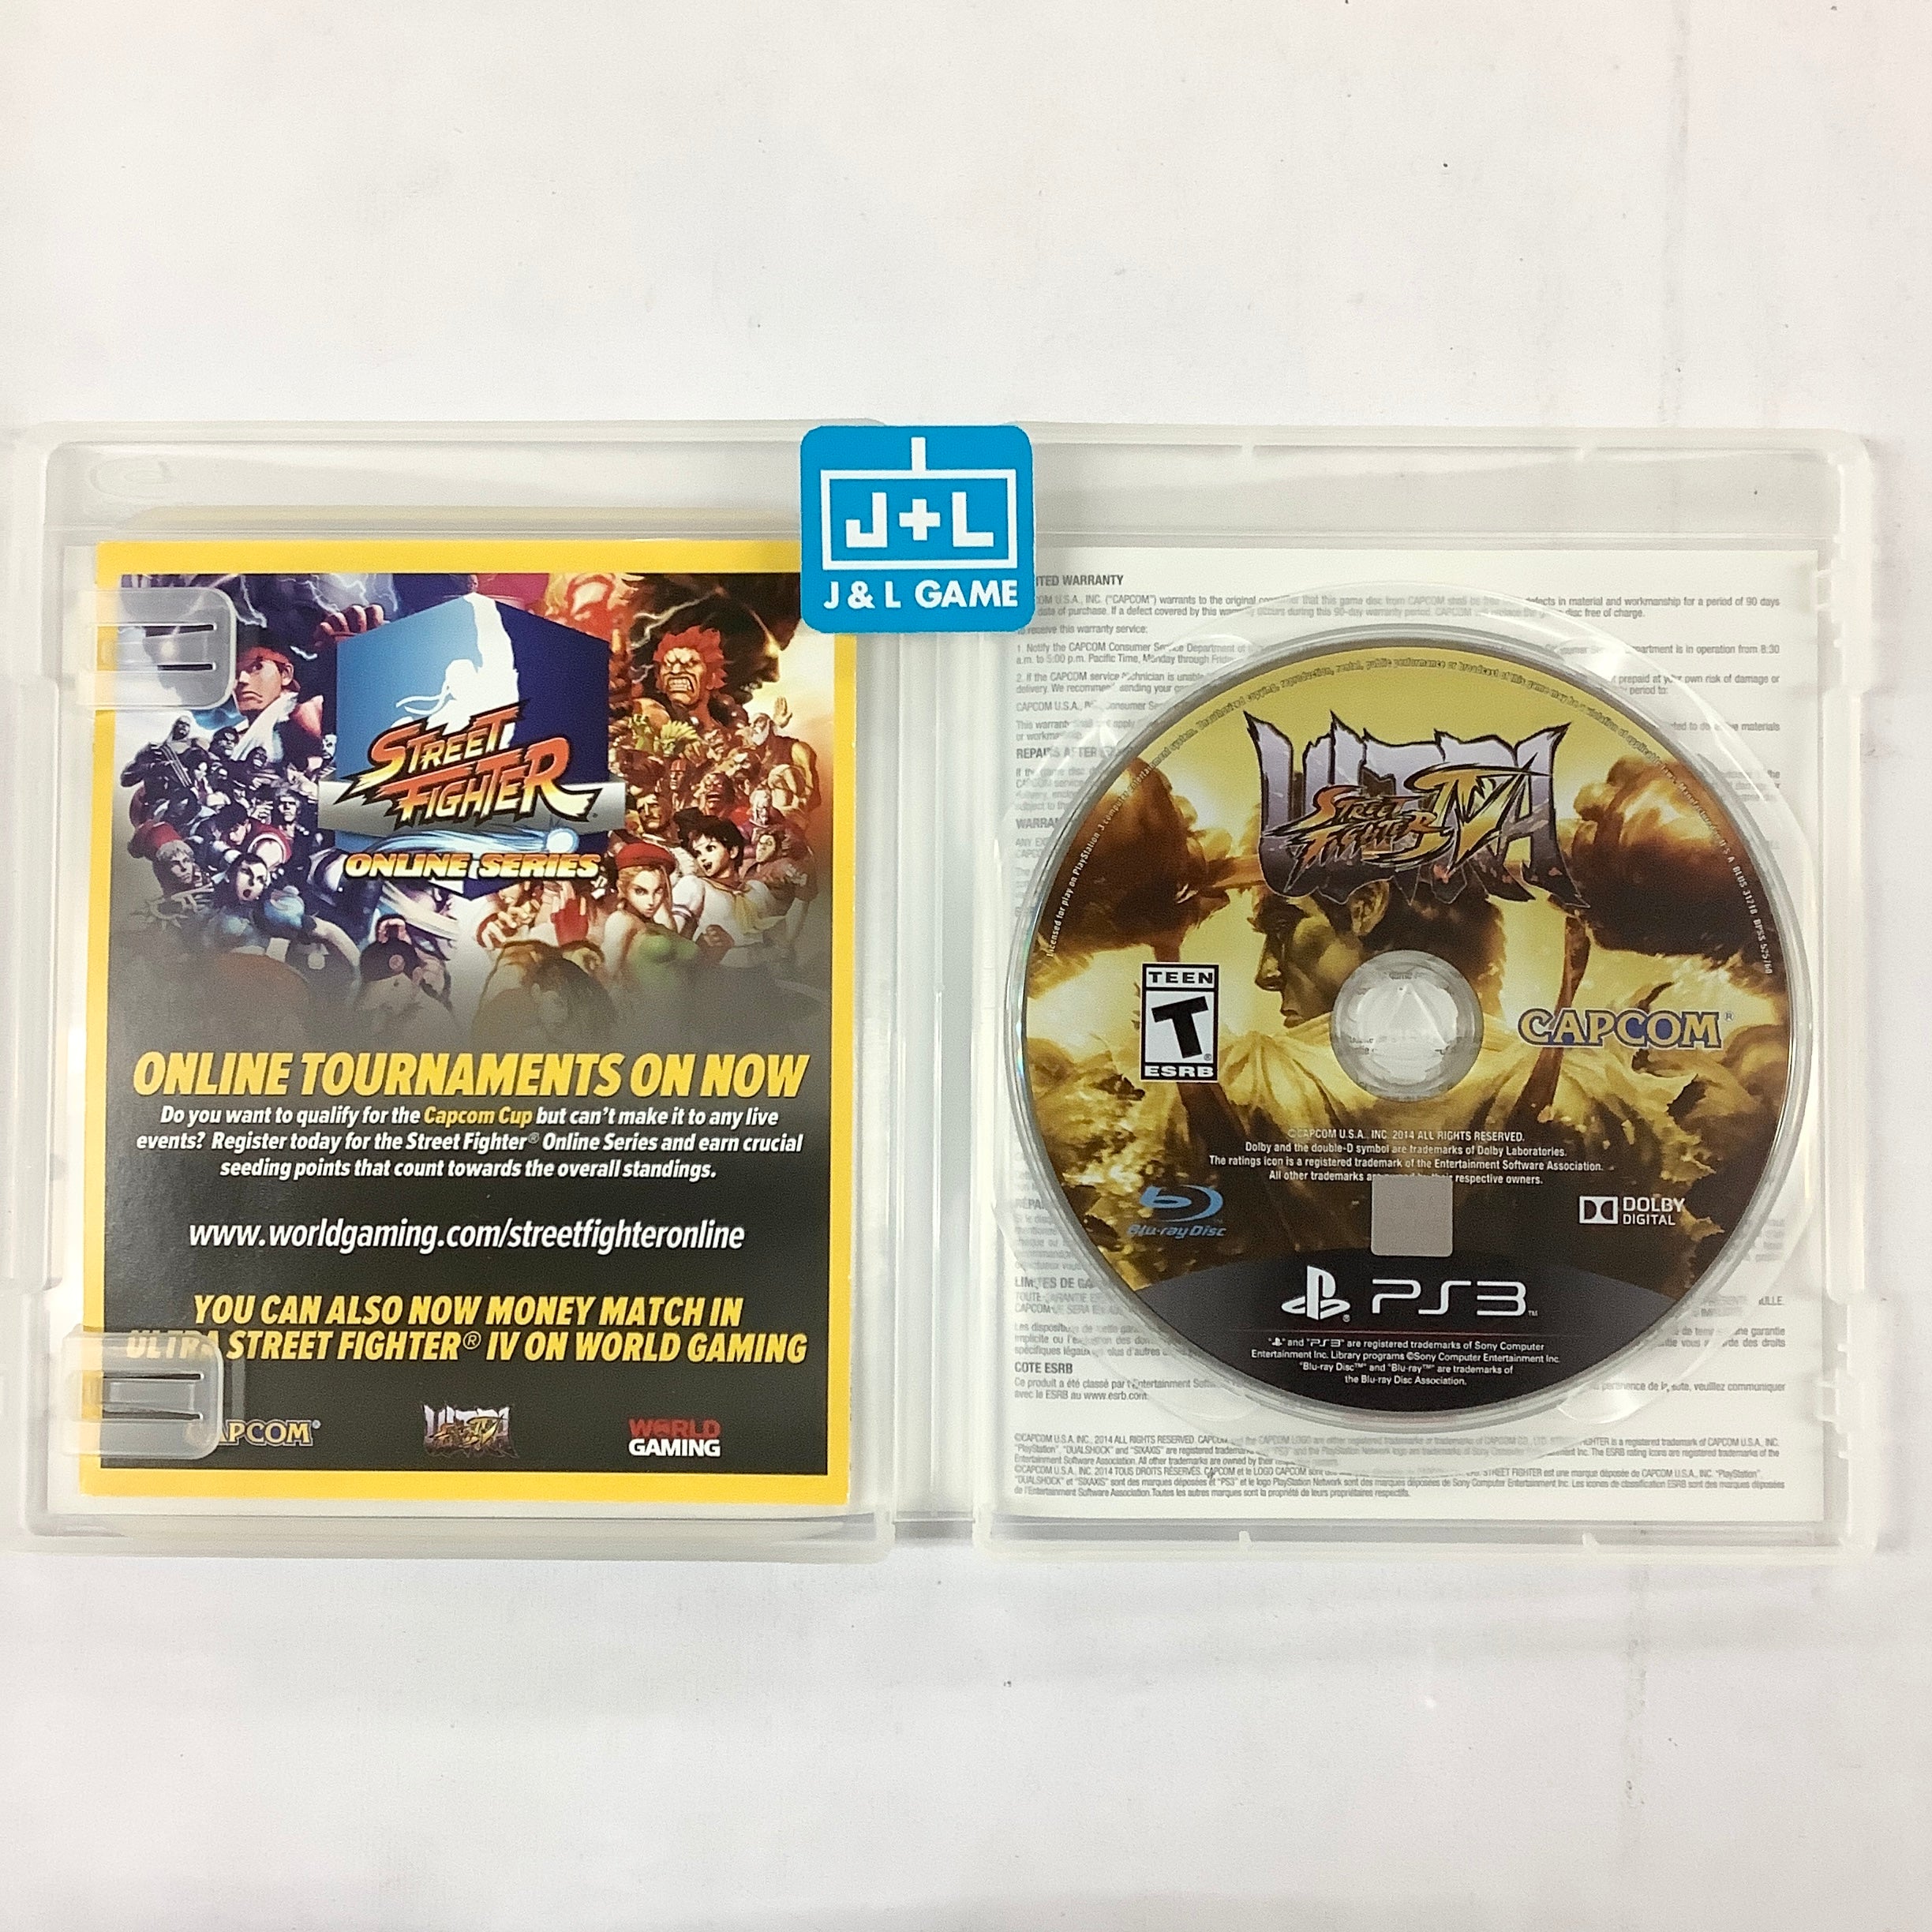 Ultra Street Fighter IV - (PS3) PlayStation 3 [Pre-Owned] Video Games Capcom   